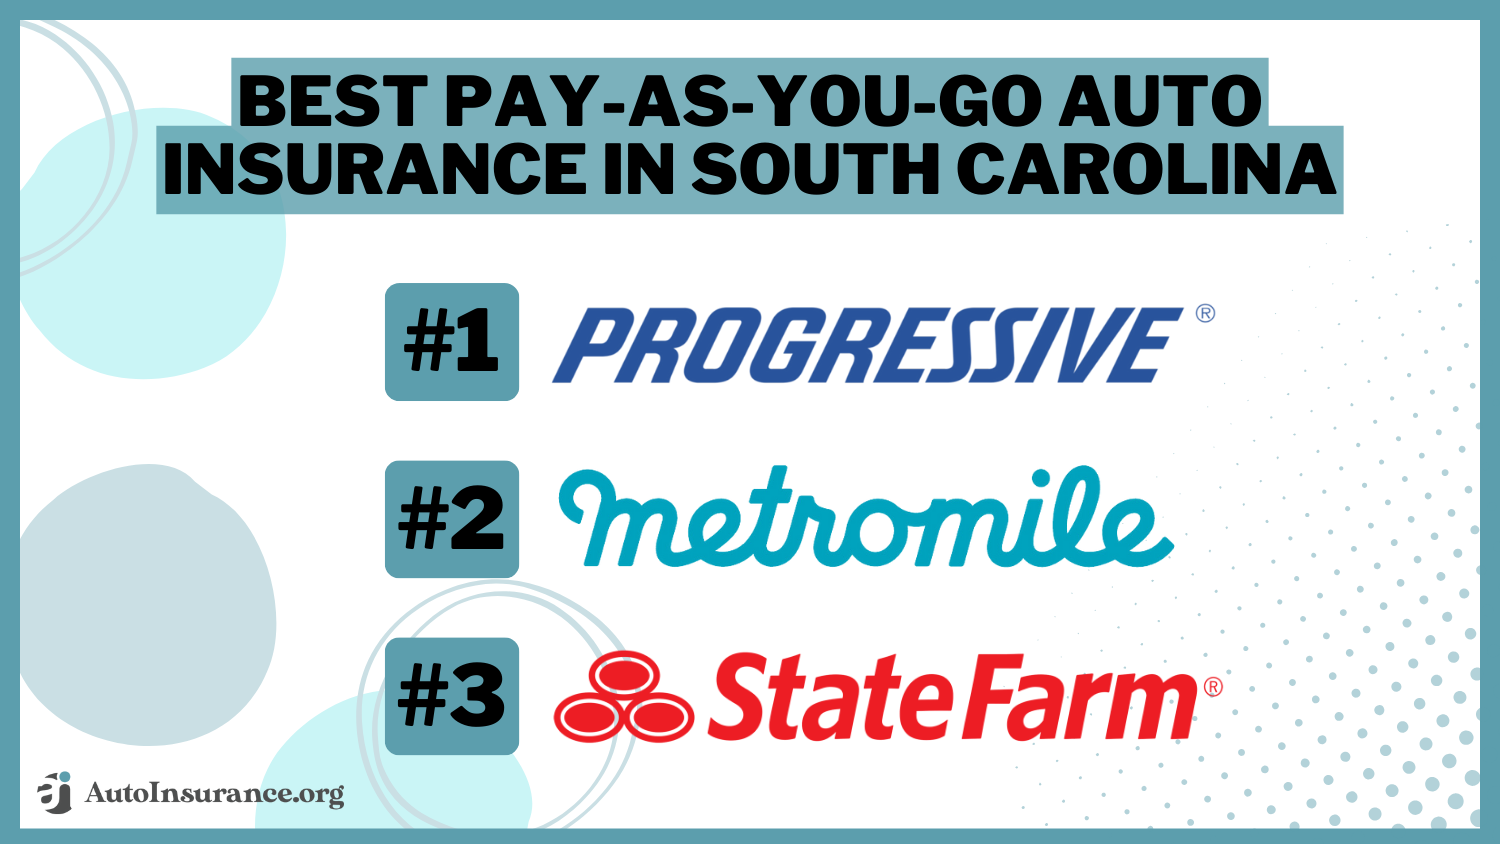 Best Pay-As-You-Go Auto Insurance in South Carolina: Progressive, Metromile, state Farm